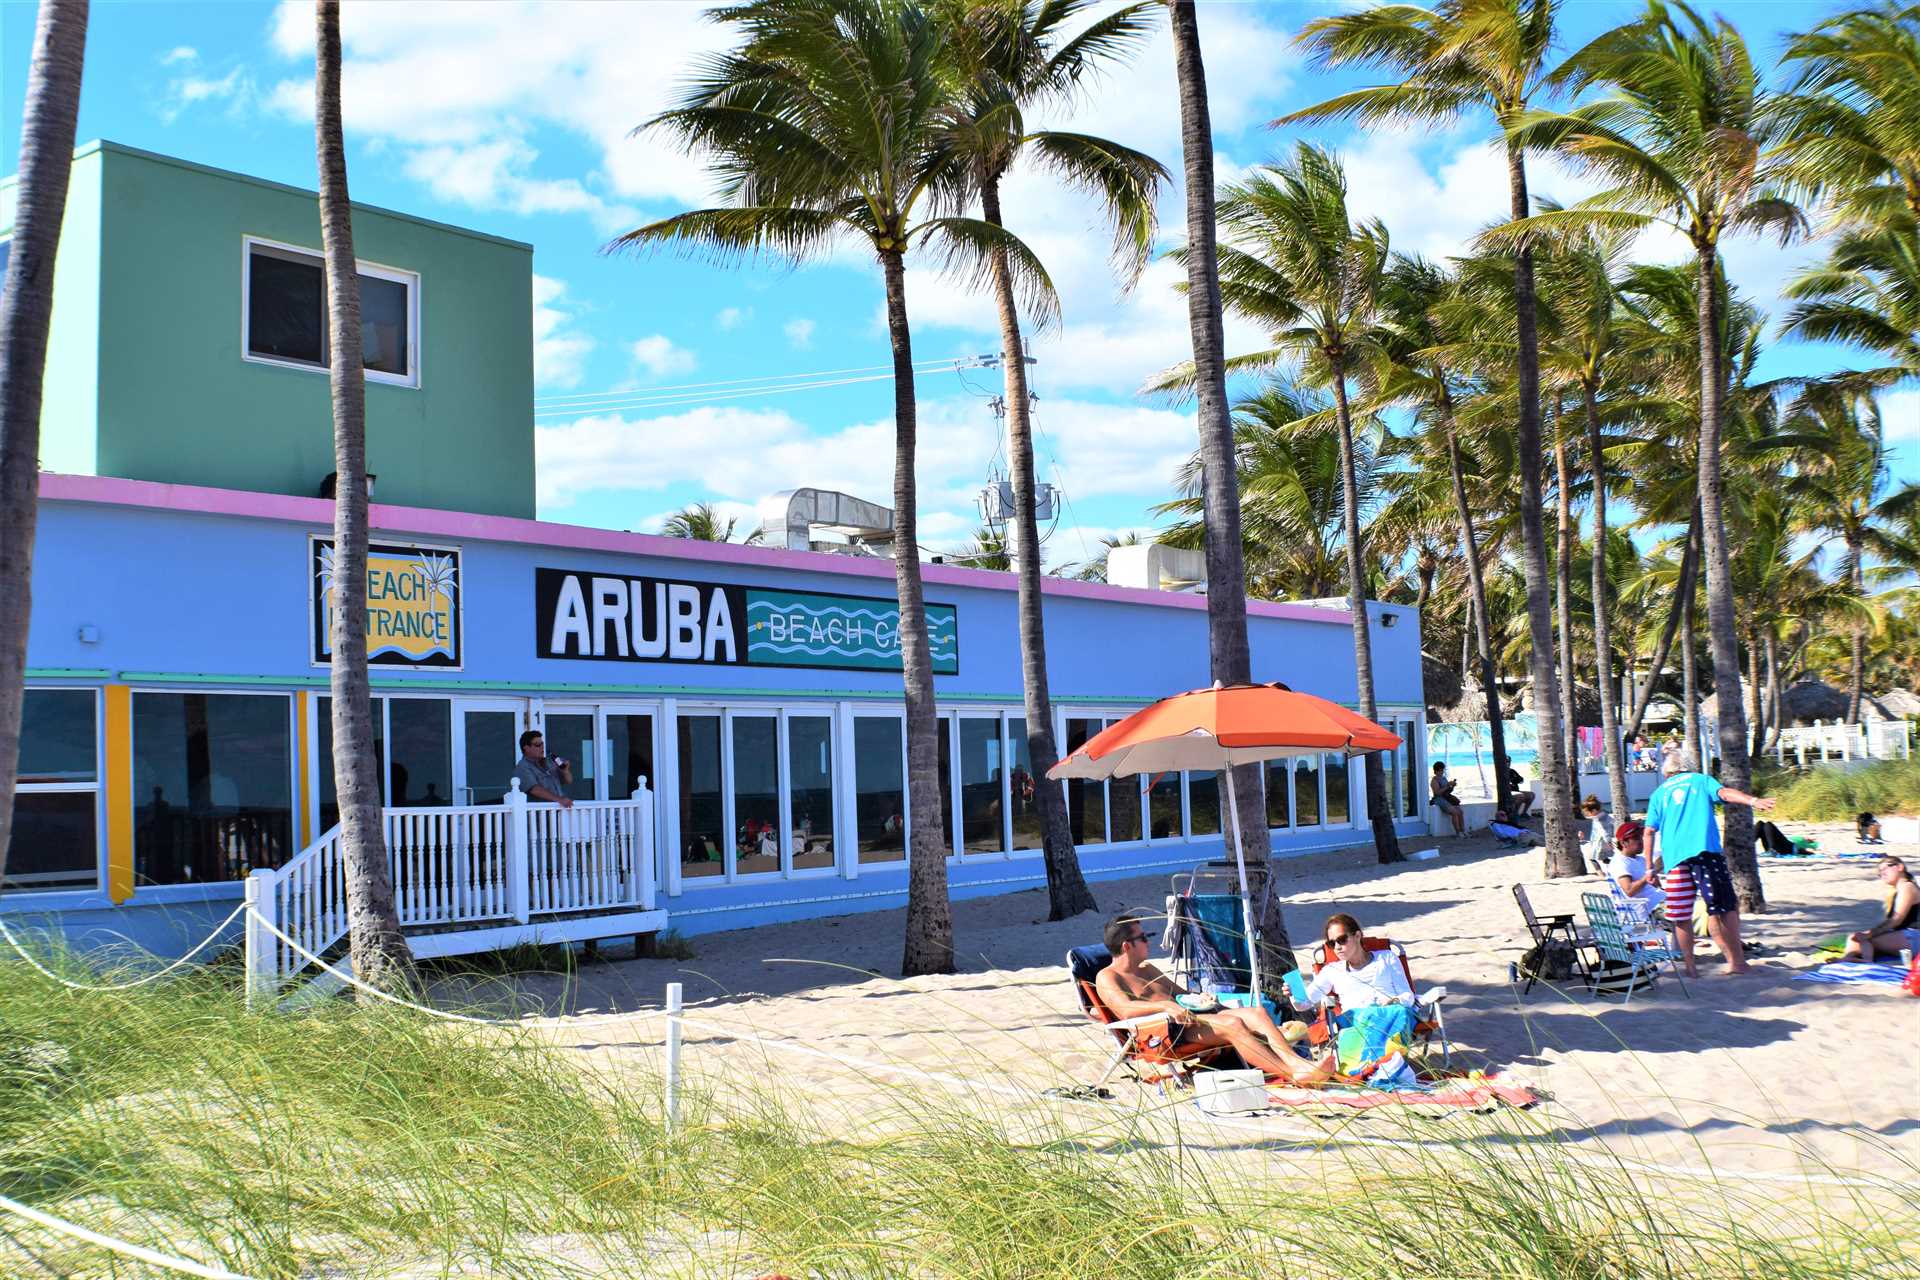 Stop in at the always popular Aruba Beach Cafe.